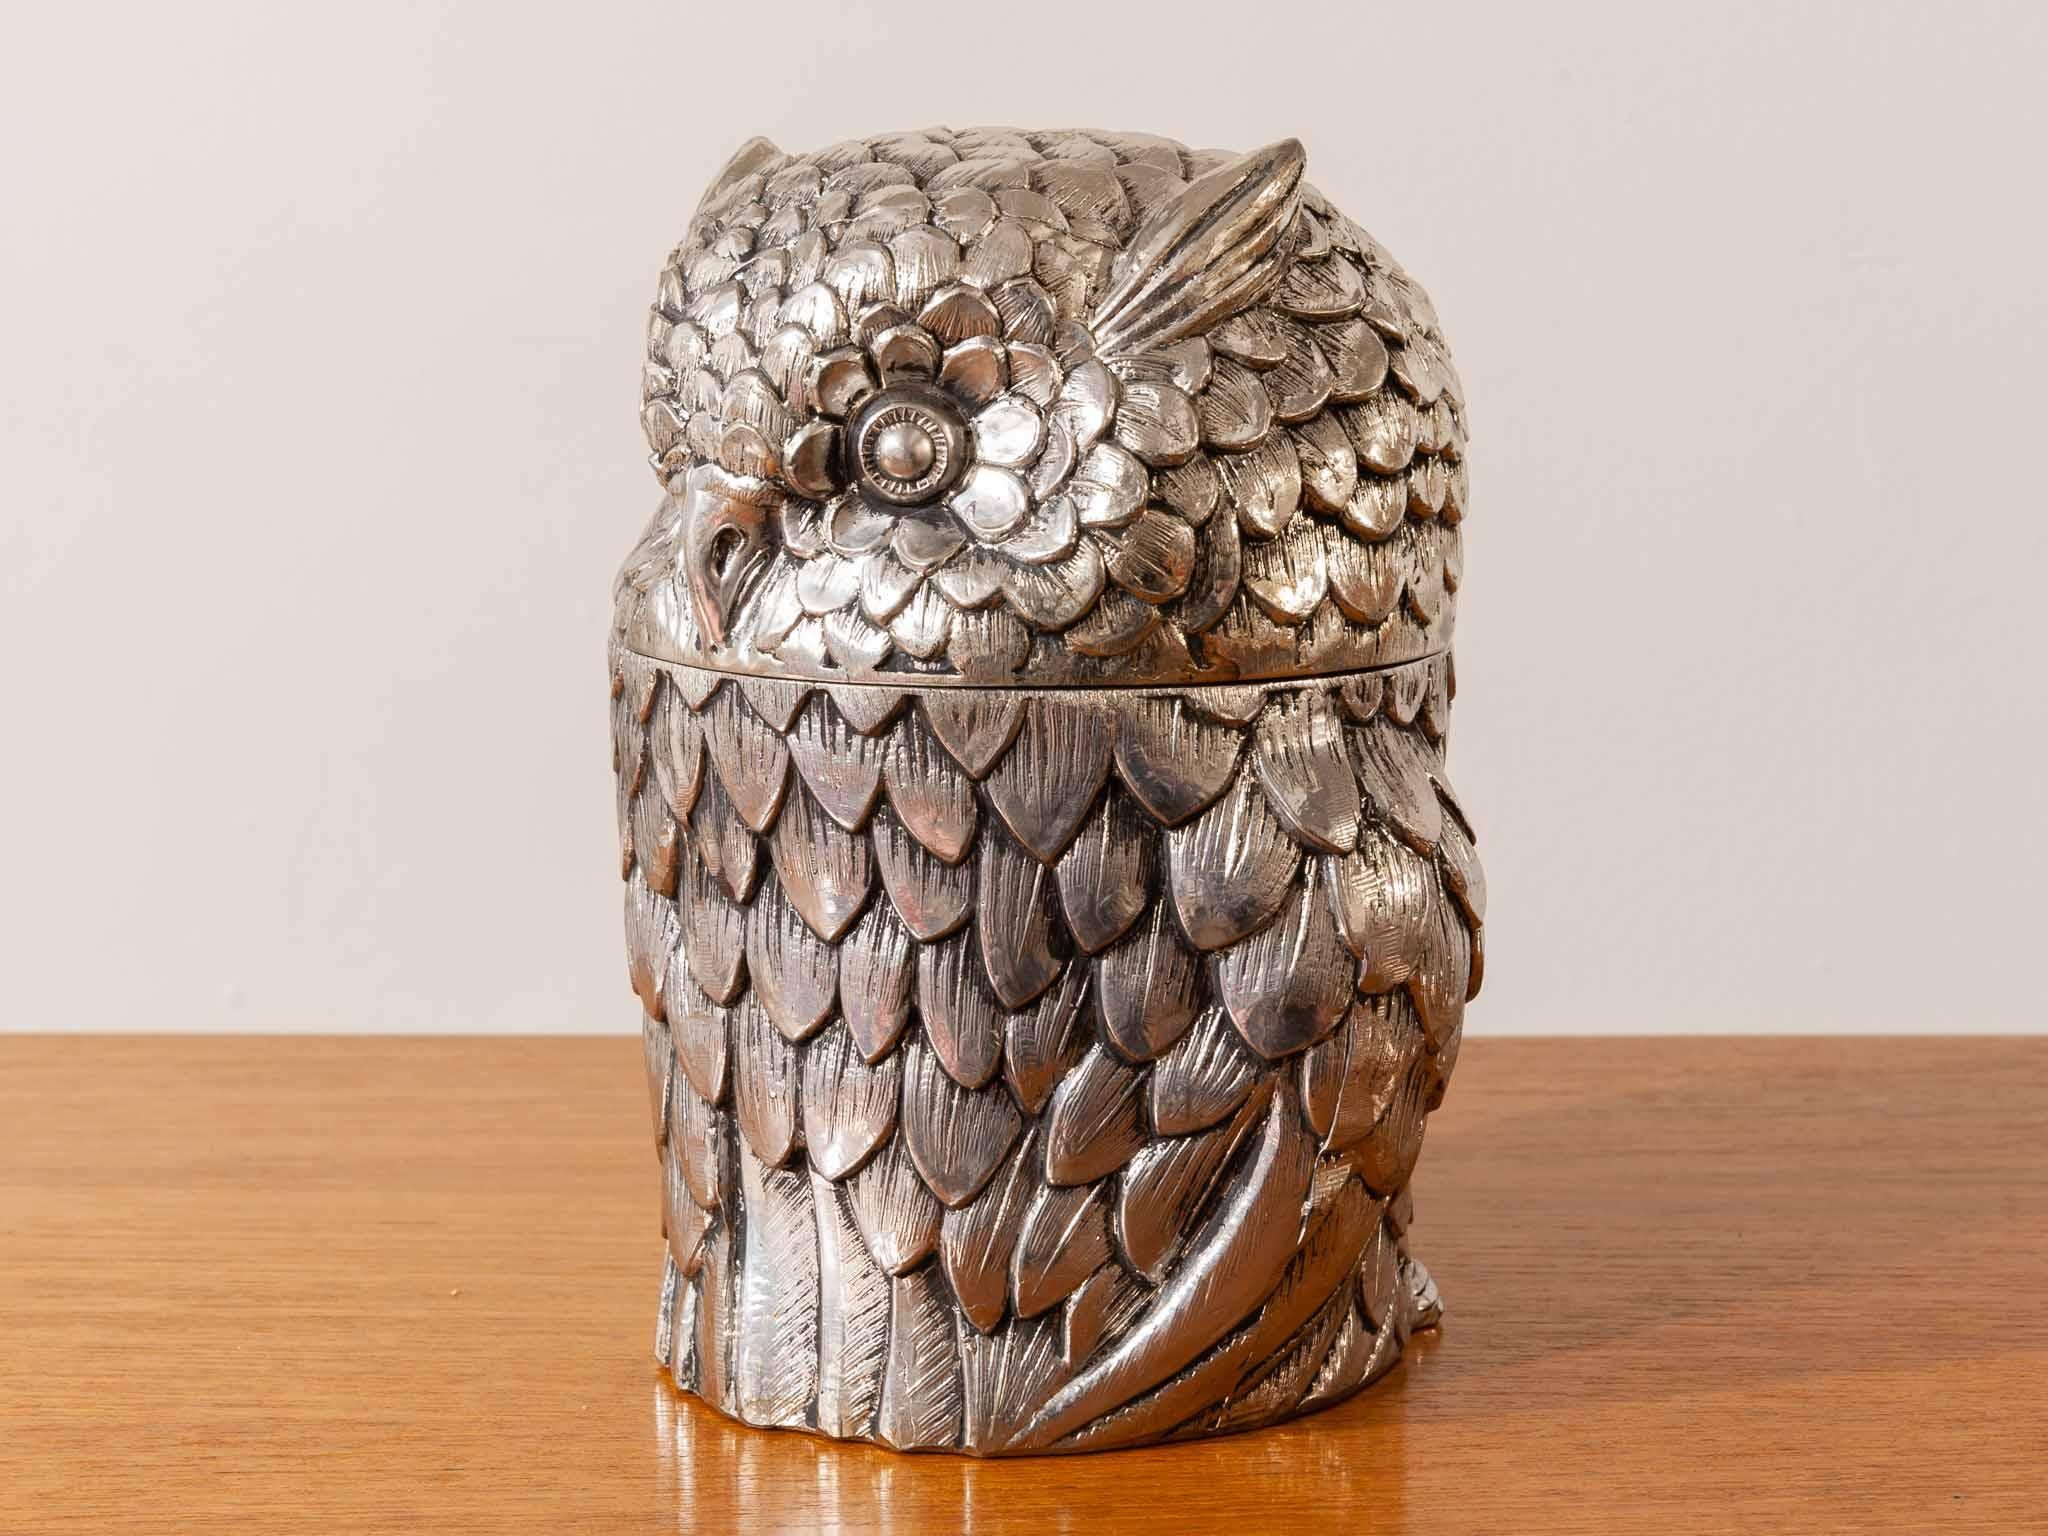 1970s Mauro Manetti Italian owl shaped ice-bucket. The makers mark is located on the base M/M R 15. Made in Italy with the M/M standing for Mauro Manetti. In excellent vintage condition. The ice-bucket also has it's original removable liner to hold